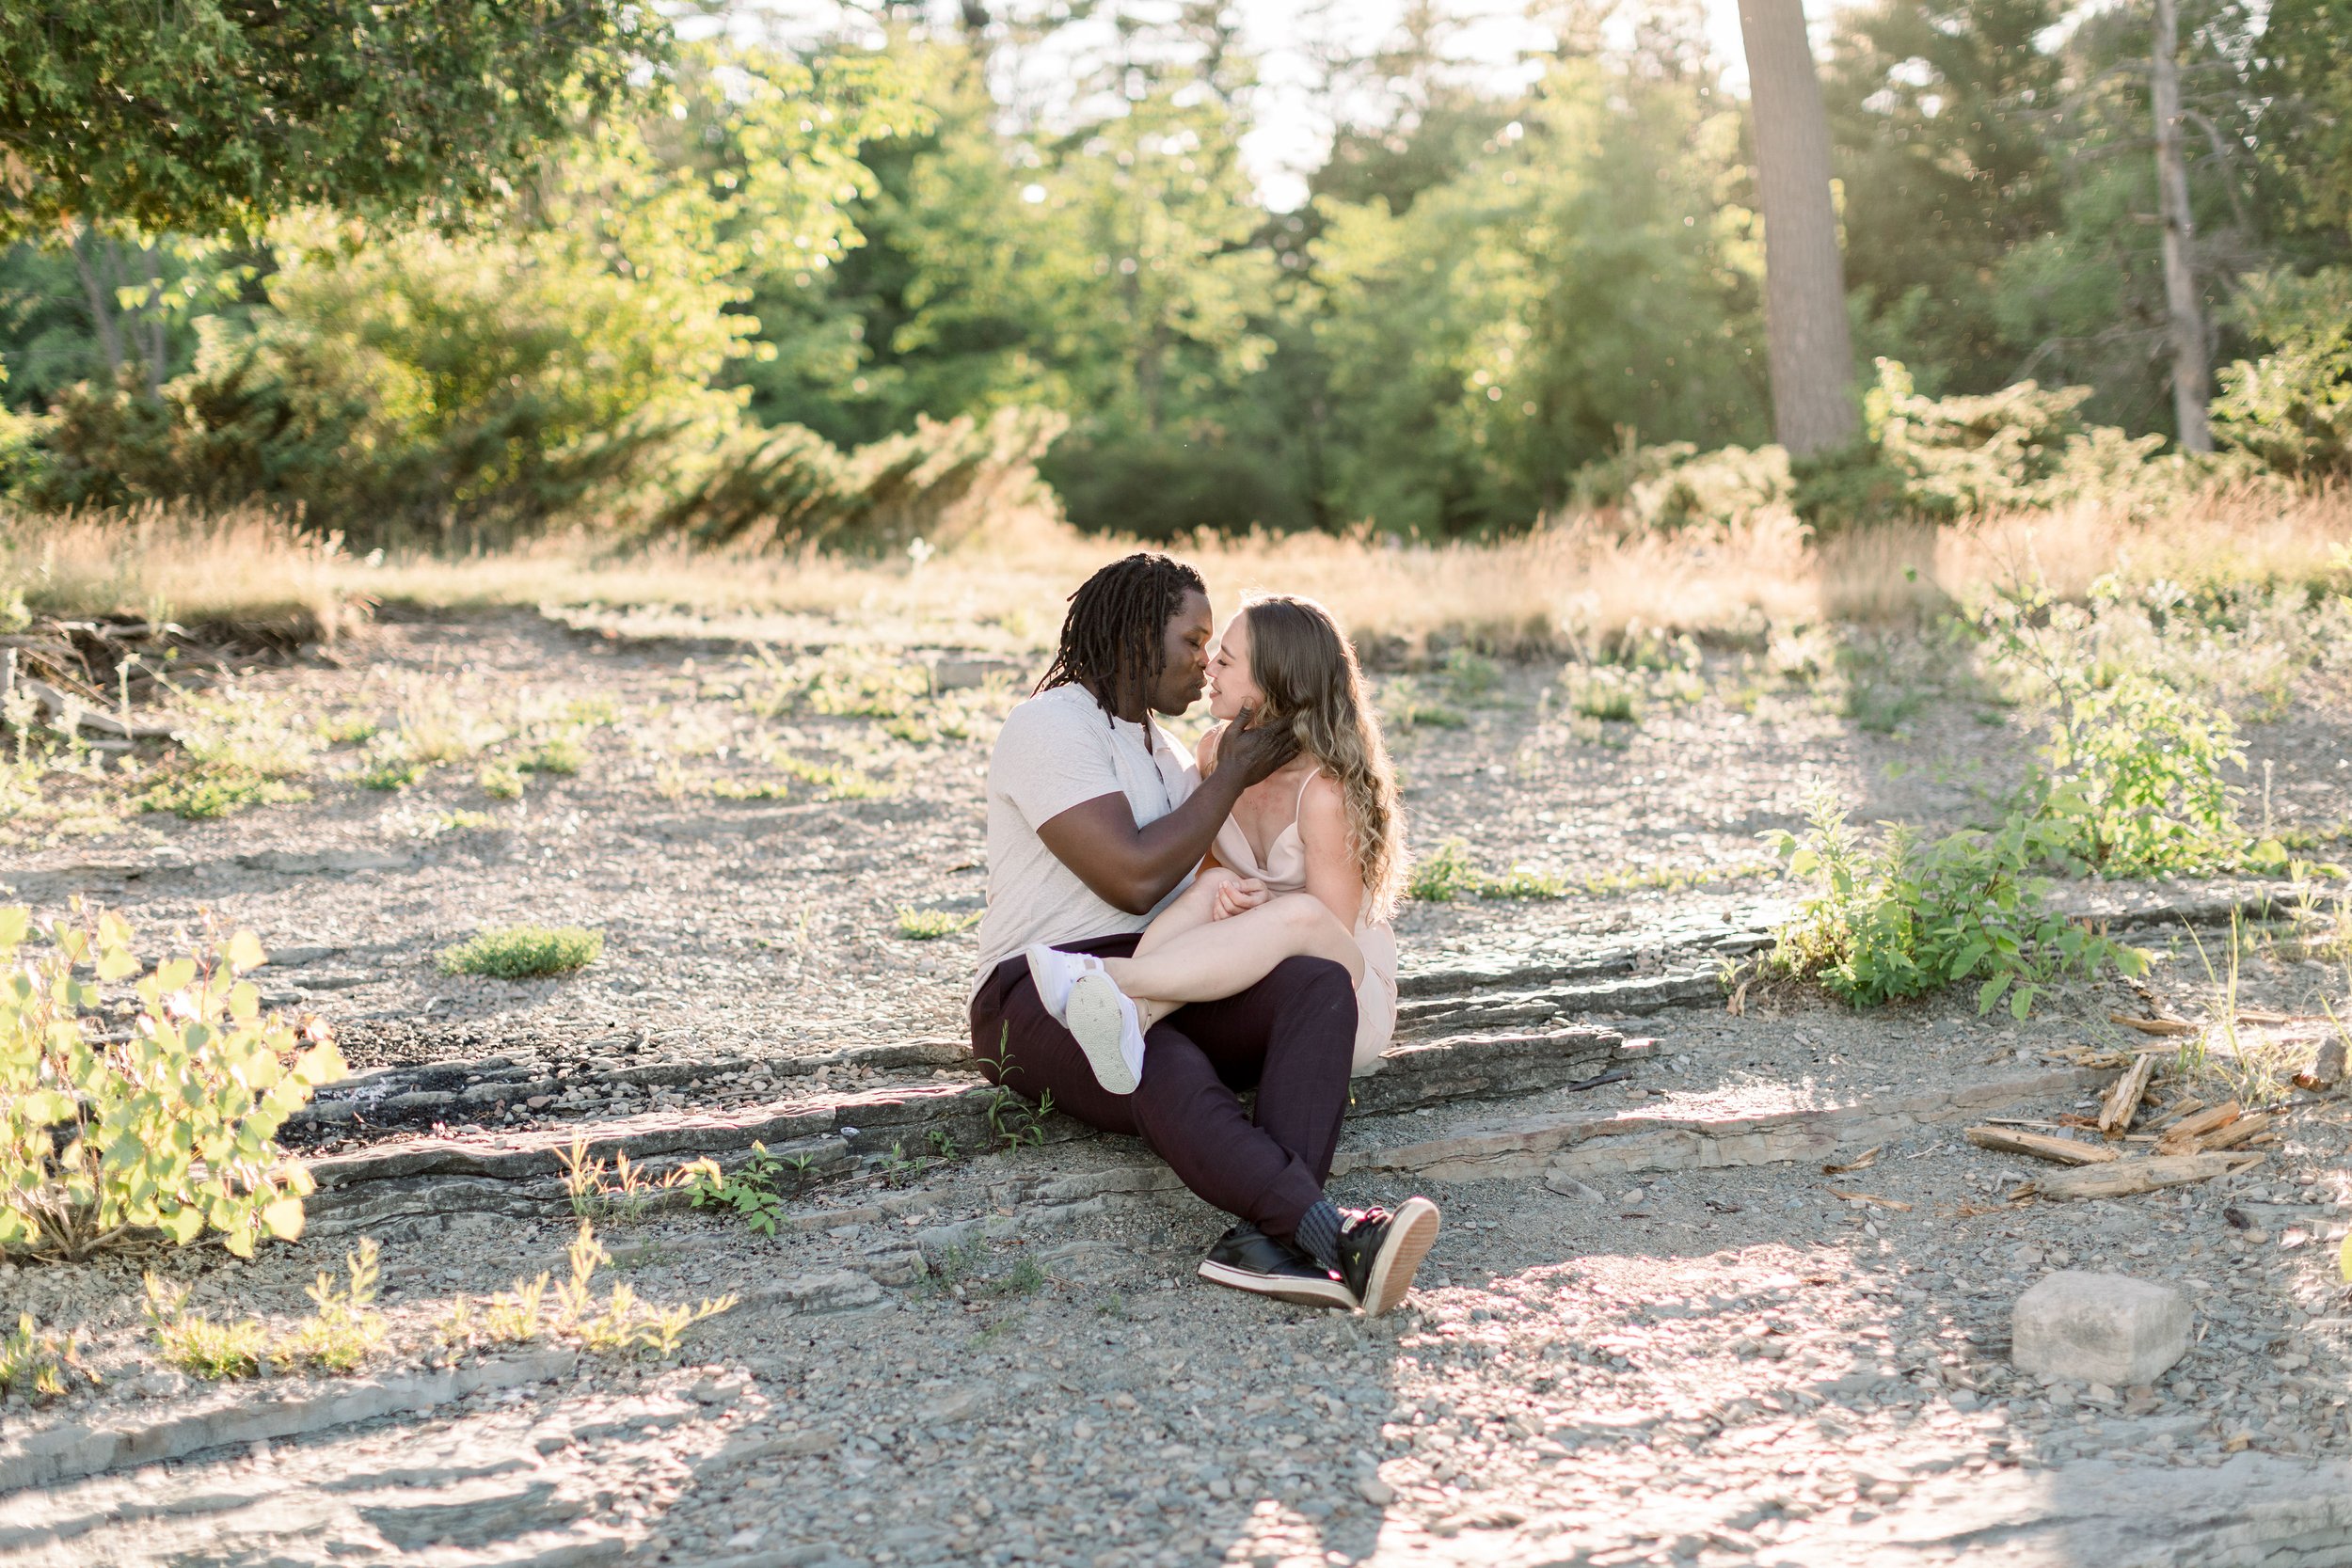  In a forest in Ontario, an engaged couple kisses on a stone stair by Chelsea Mason Photography. fiance kissing couple #Chelseamasonphotography #Chelseamasonengagements #Onatarioengagements #Pinhey'sPoint #Ontarioweddingphotographers 